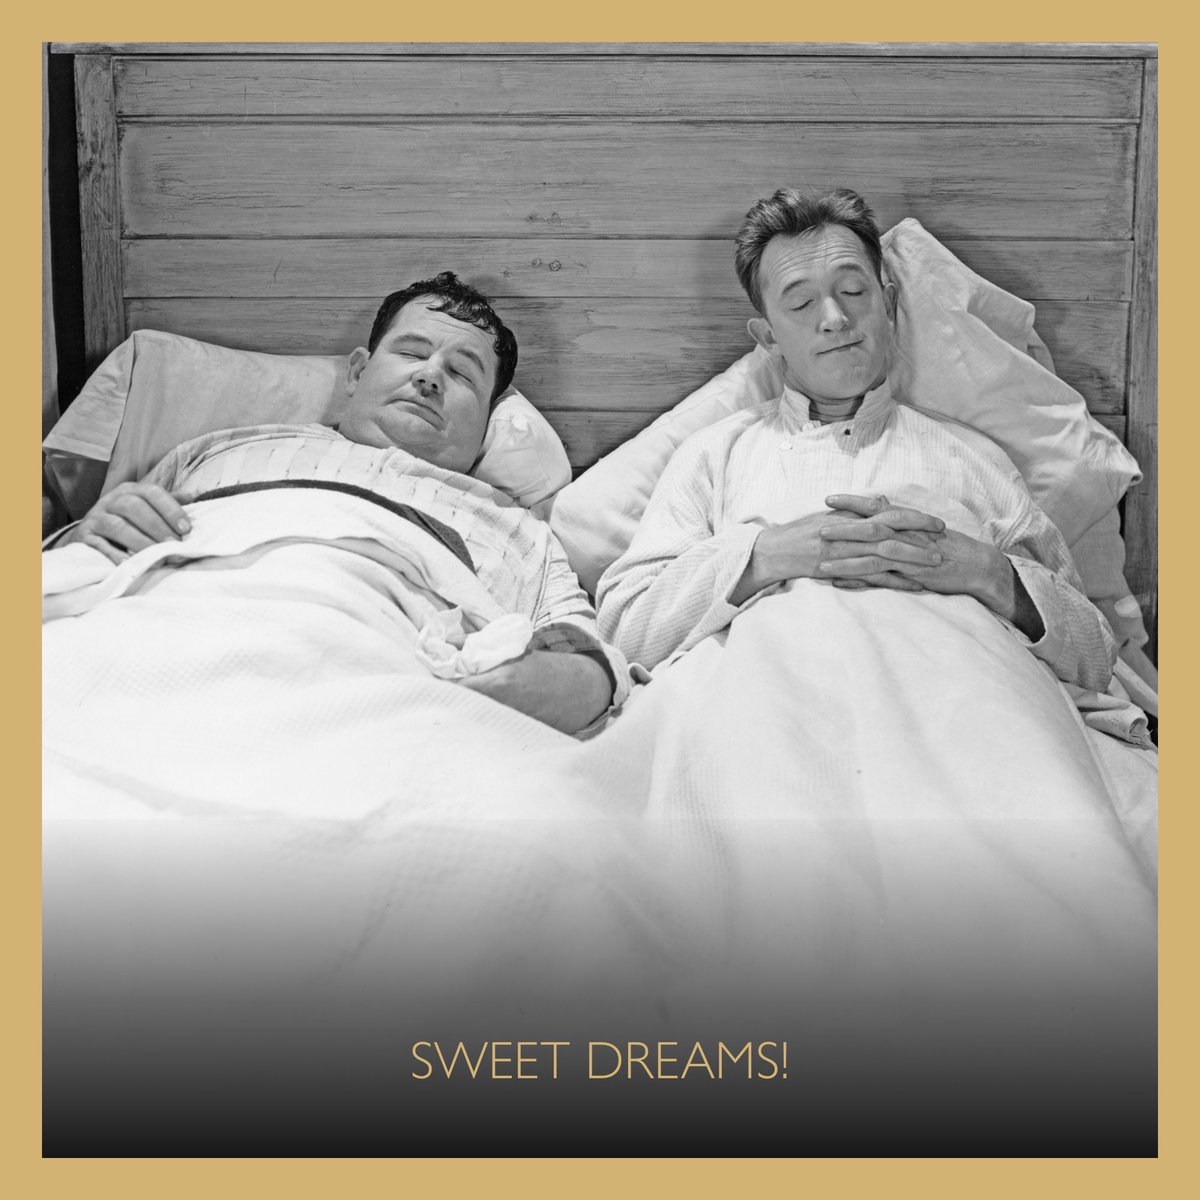 Well, that's me done for another day! Good night, folks! For more Laurel & Hardy fun, visit laurelandhardyfilms.com/podcast